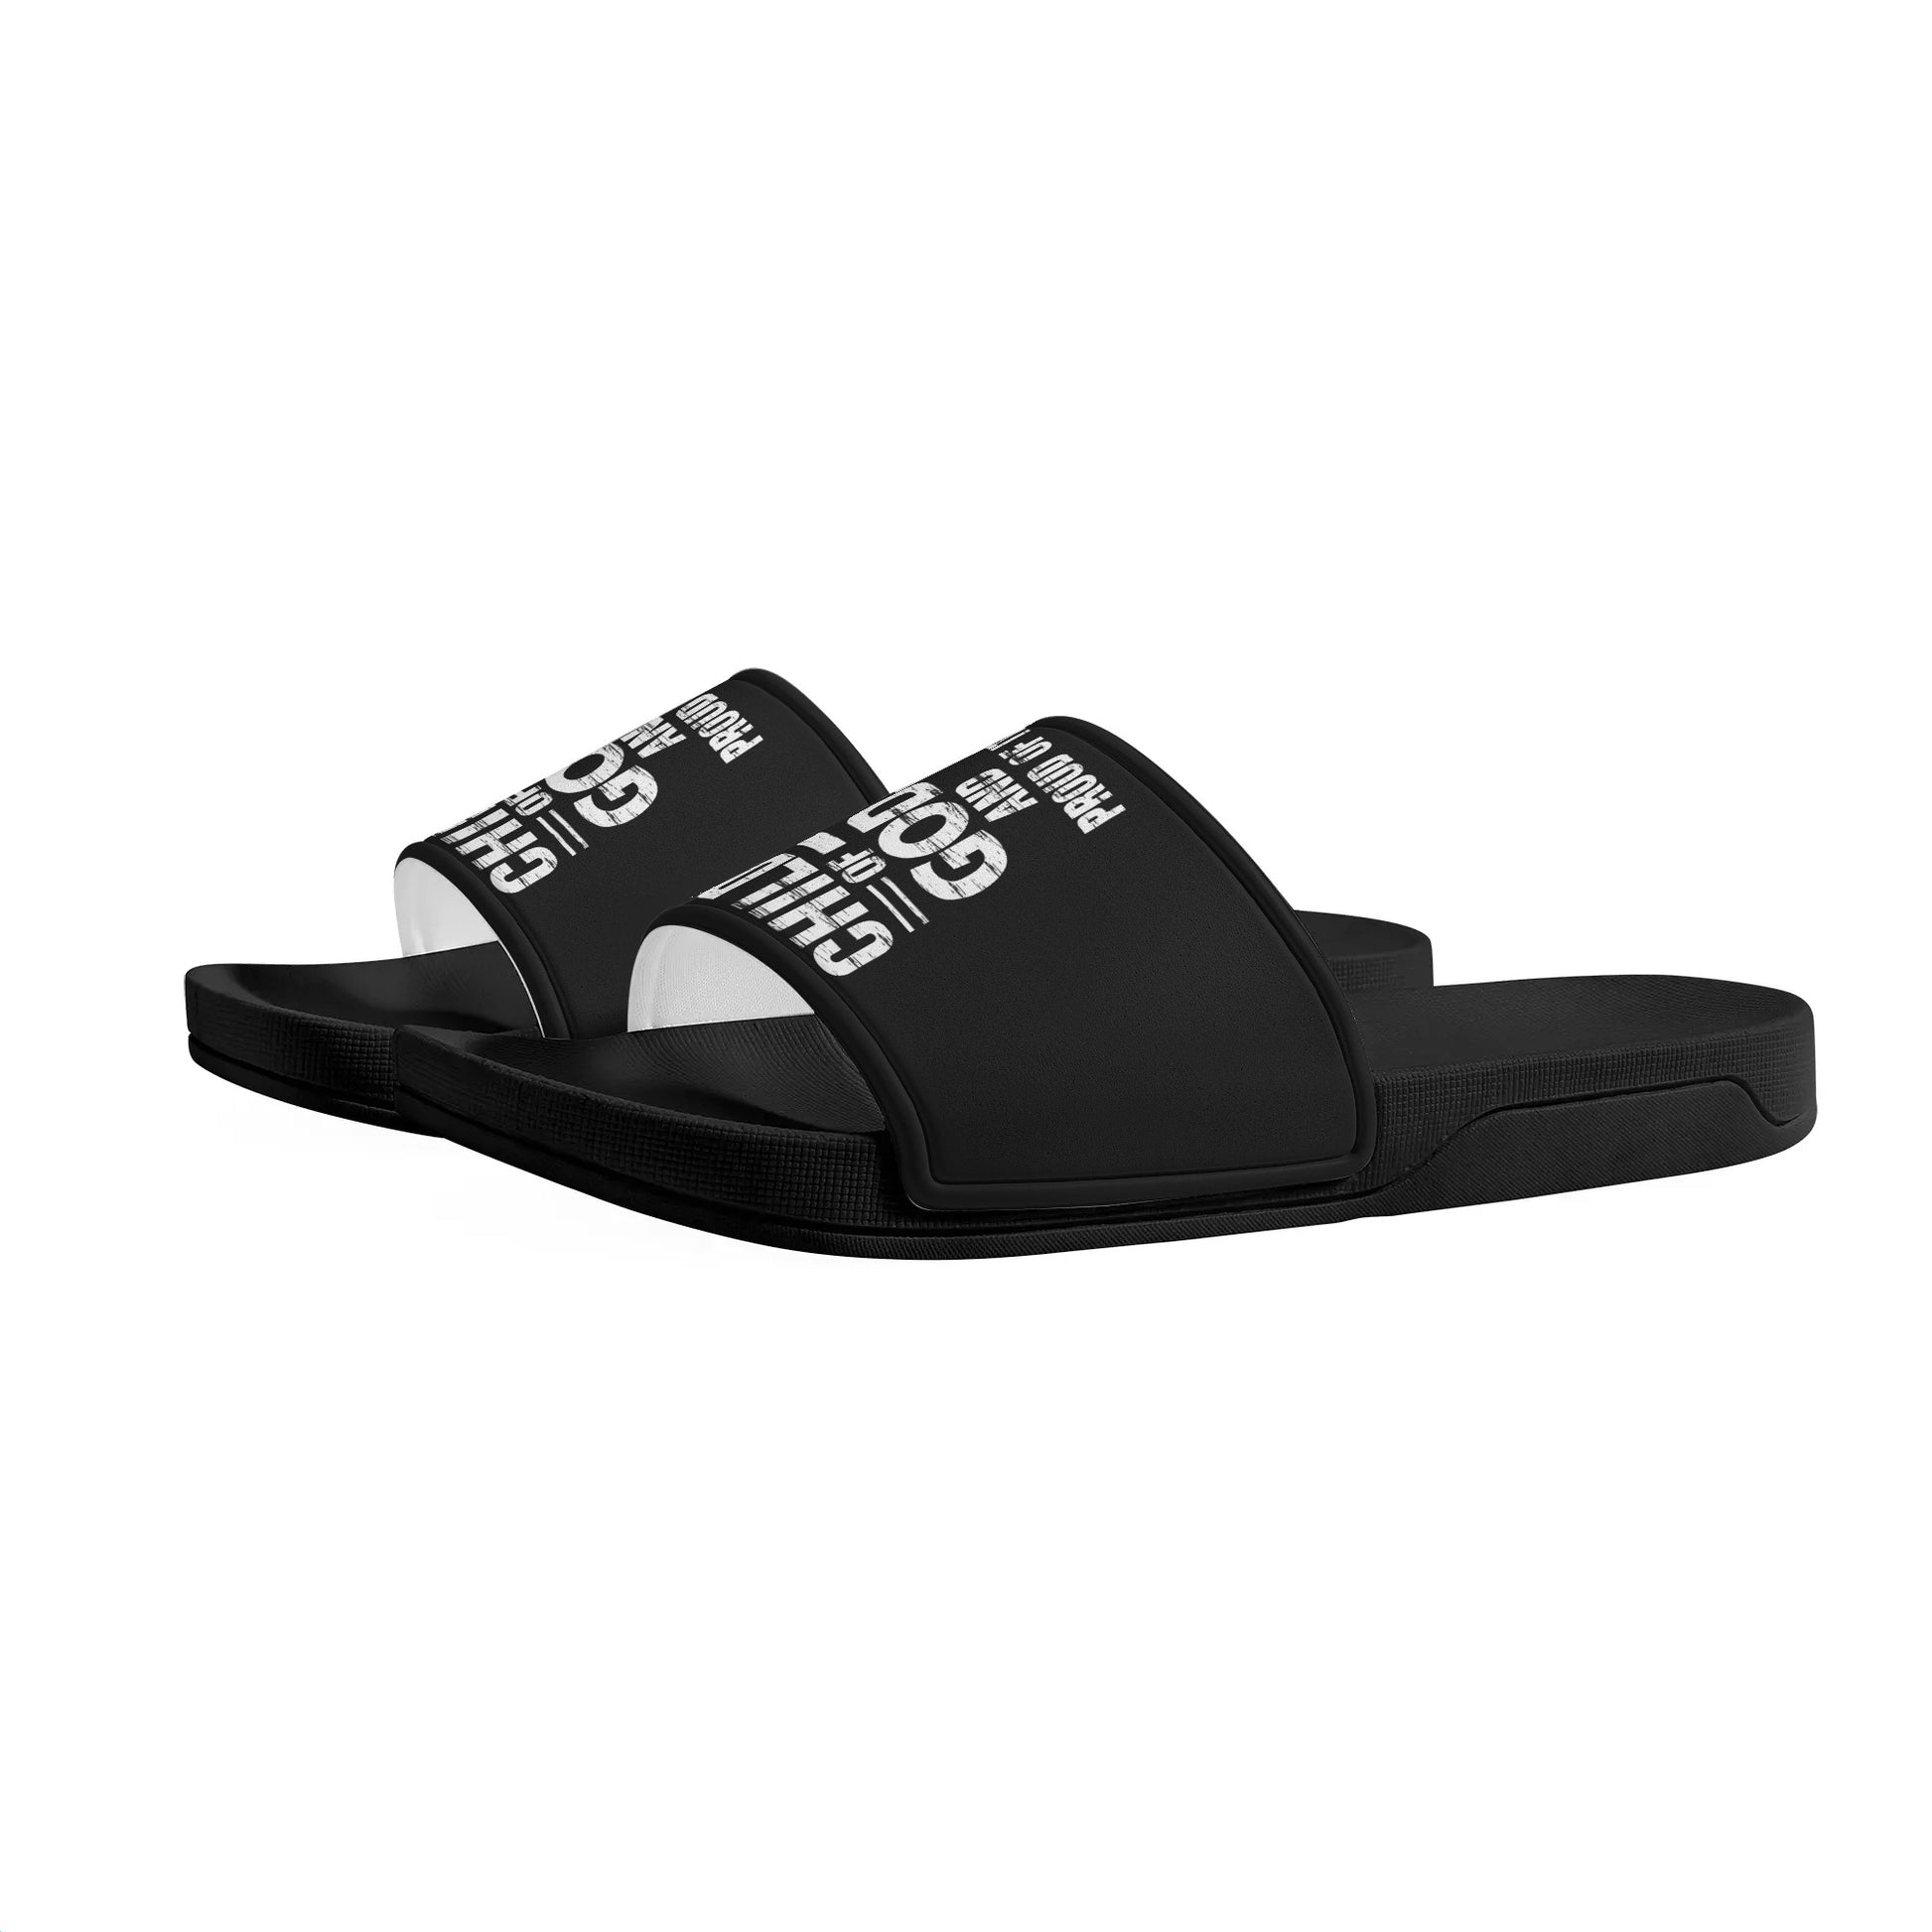 Child Of God And Proud Of It Mens Christian Spanish Slide Sandals popcustoms